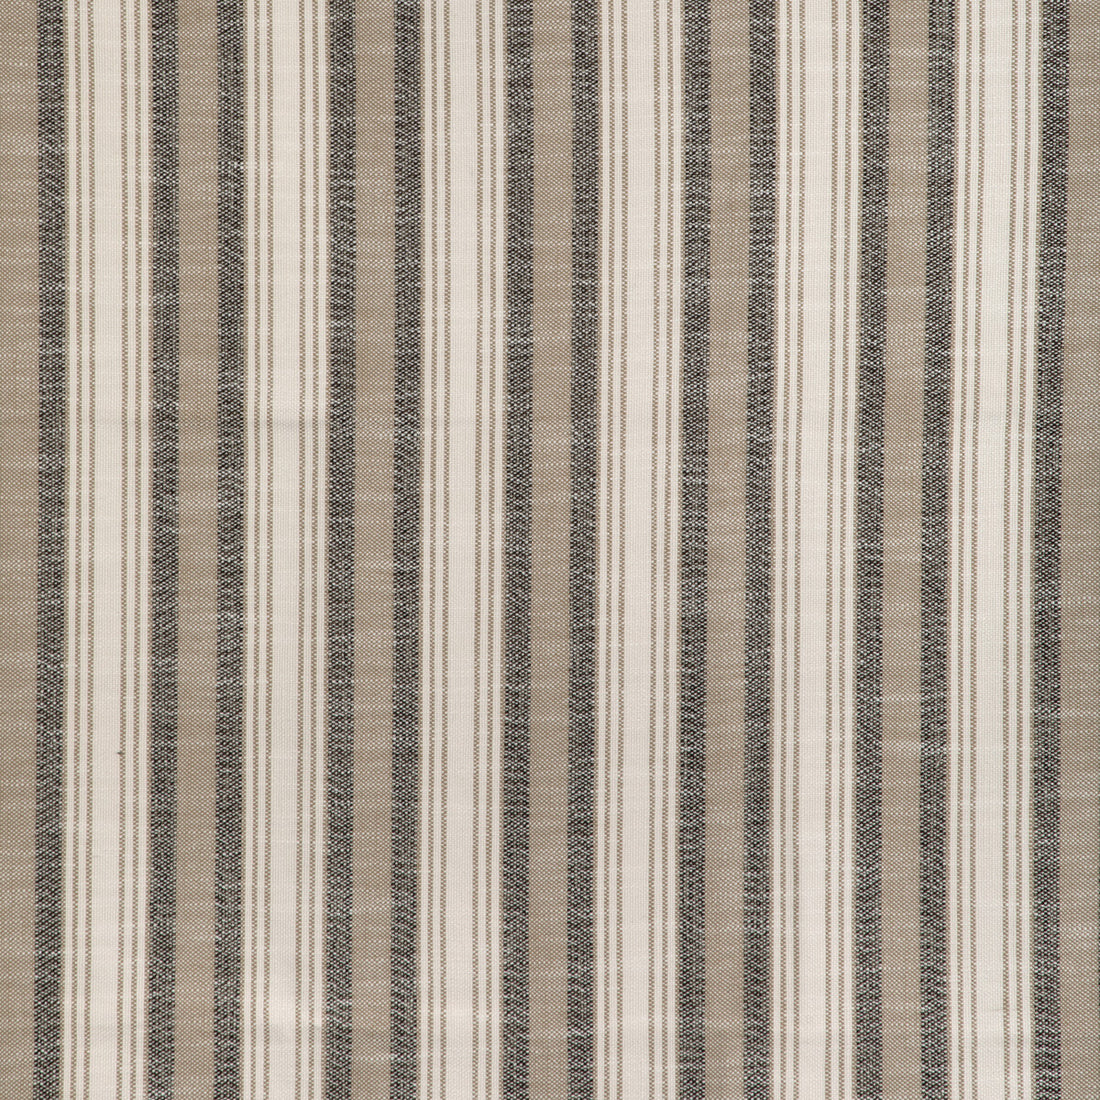 Sims Stripe fabric in latte color - pattern 37046.616.0 - by Kravet Design in the Thom Filicia Latitude collection